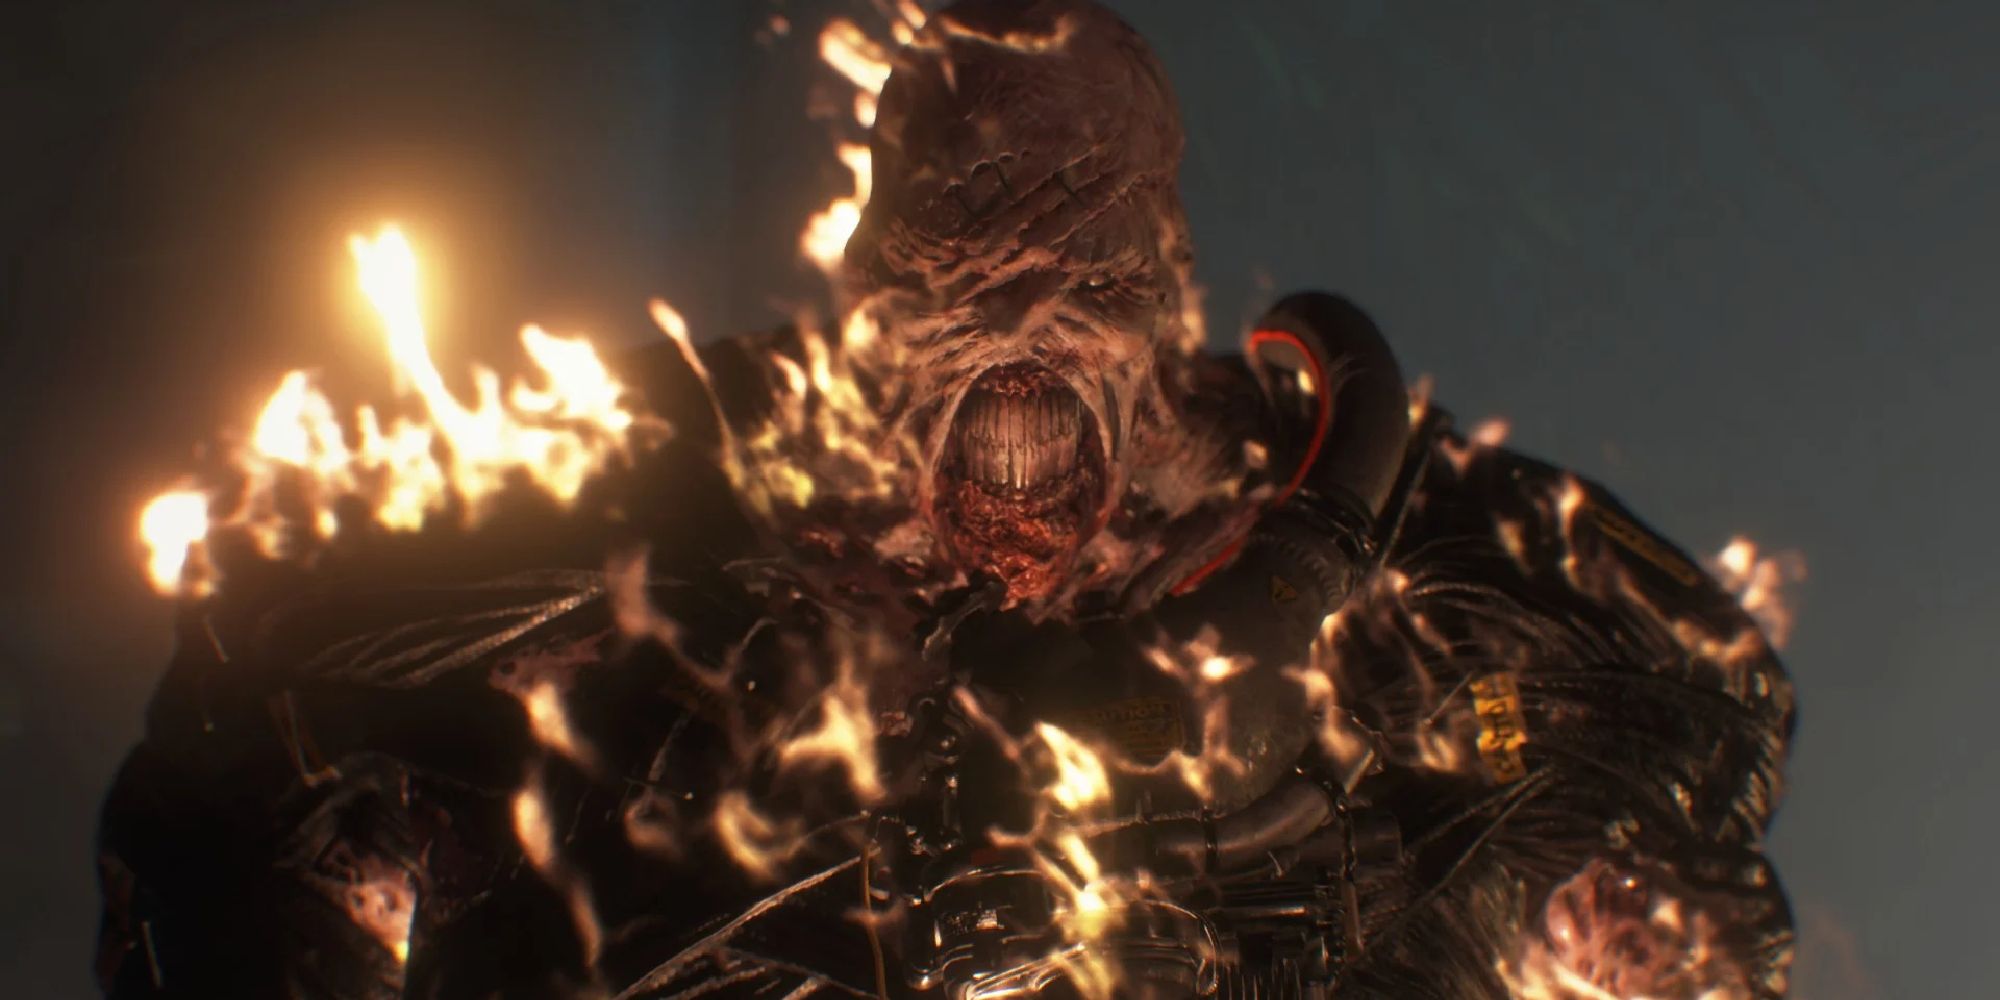 Nemesis as depicted in the Resident Evil 3 remake, shown on flames as the unstoppable juggernaut he is.